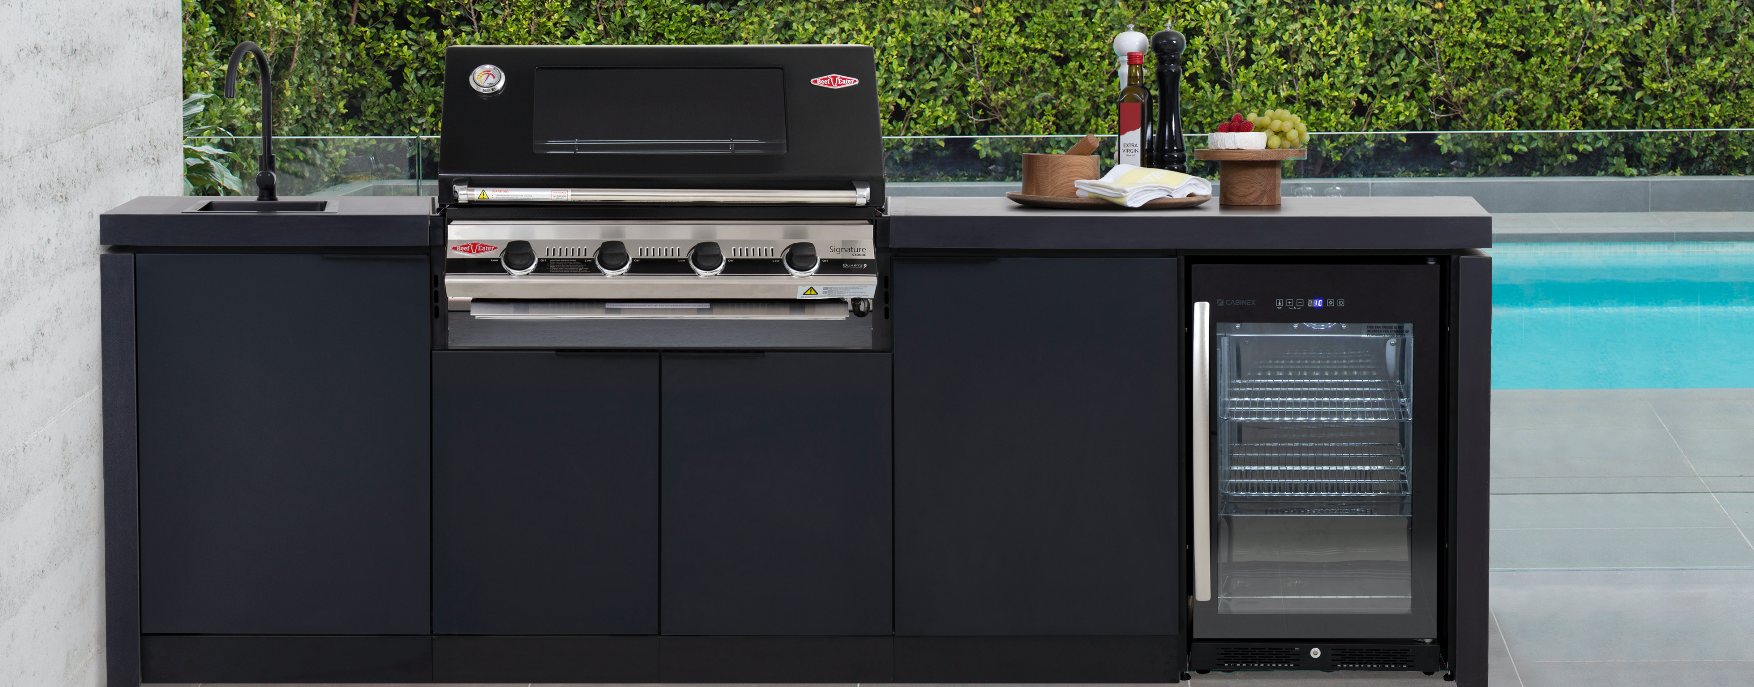 Cabinex Classic Outdoor Kitchen With Beefeater Discovery 1500 5 Burner Gas BBQ